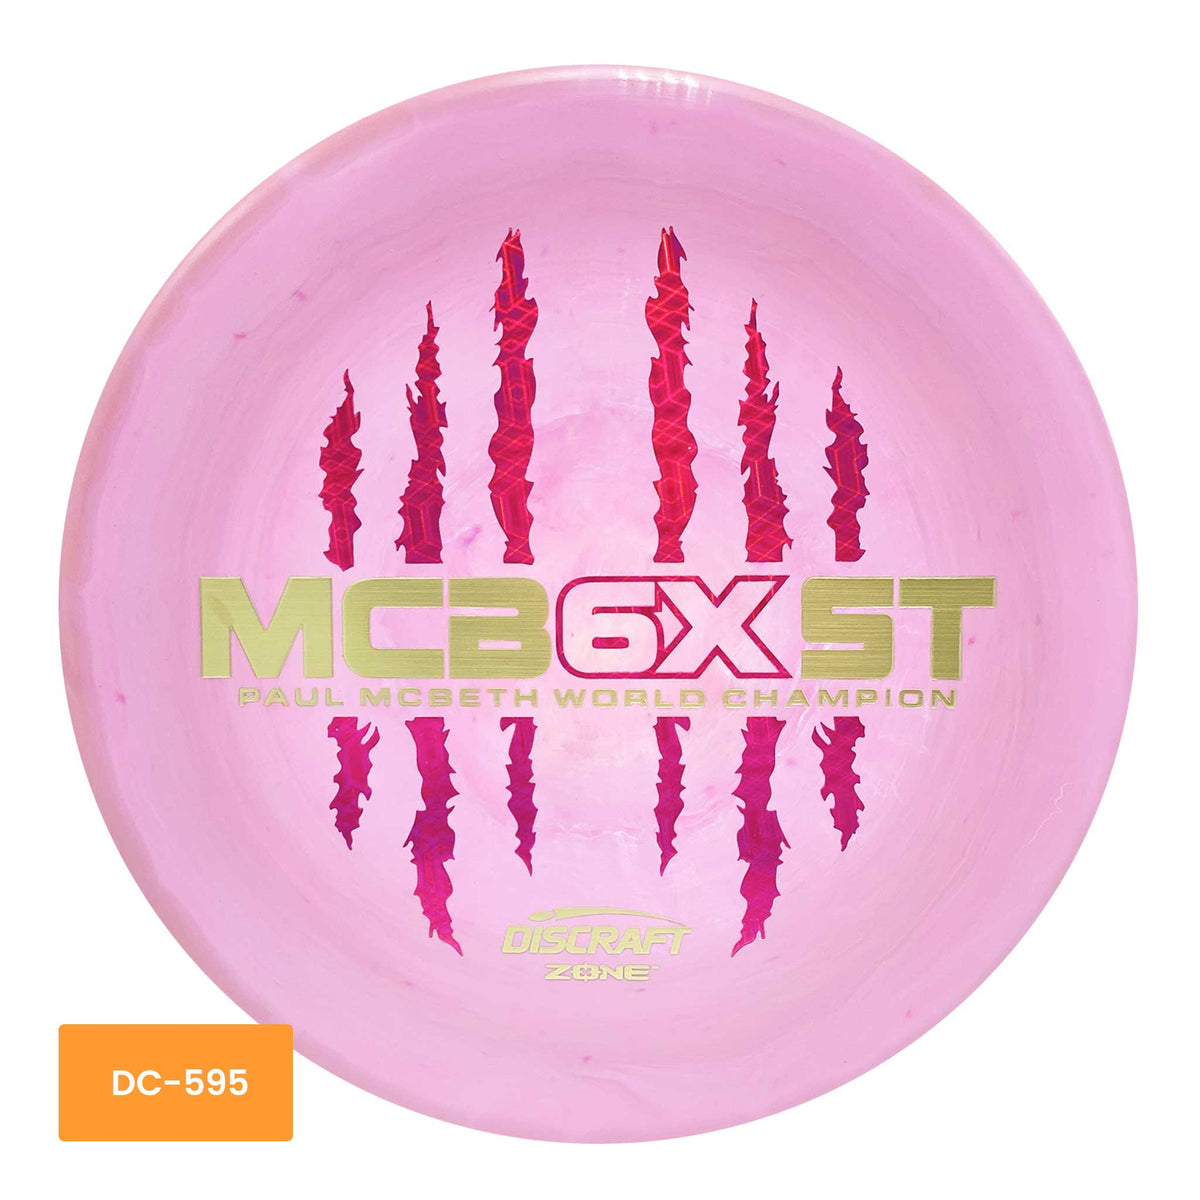 Discraft Paul McBeth MCB6XST ESP Zone putter and approach - Light Pink